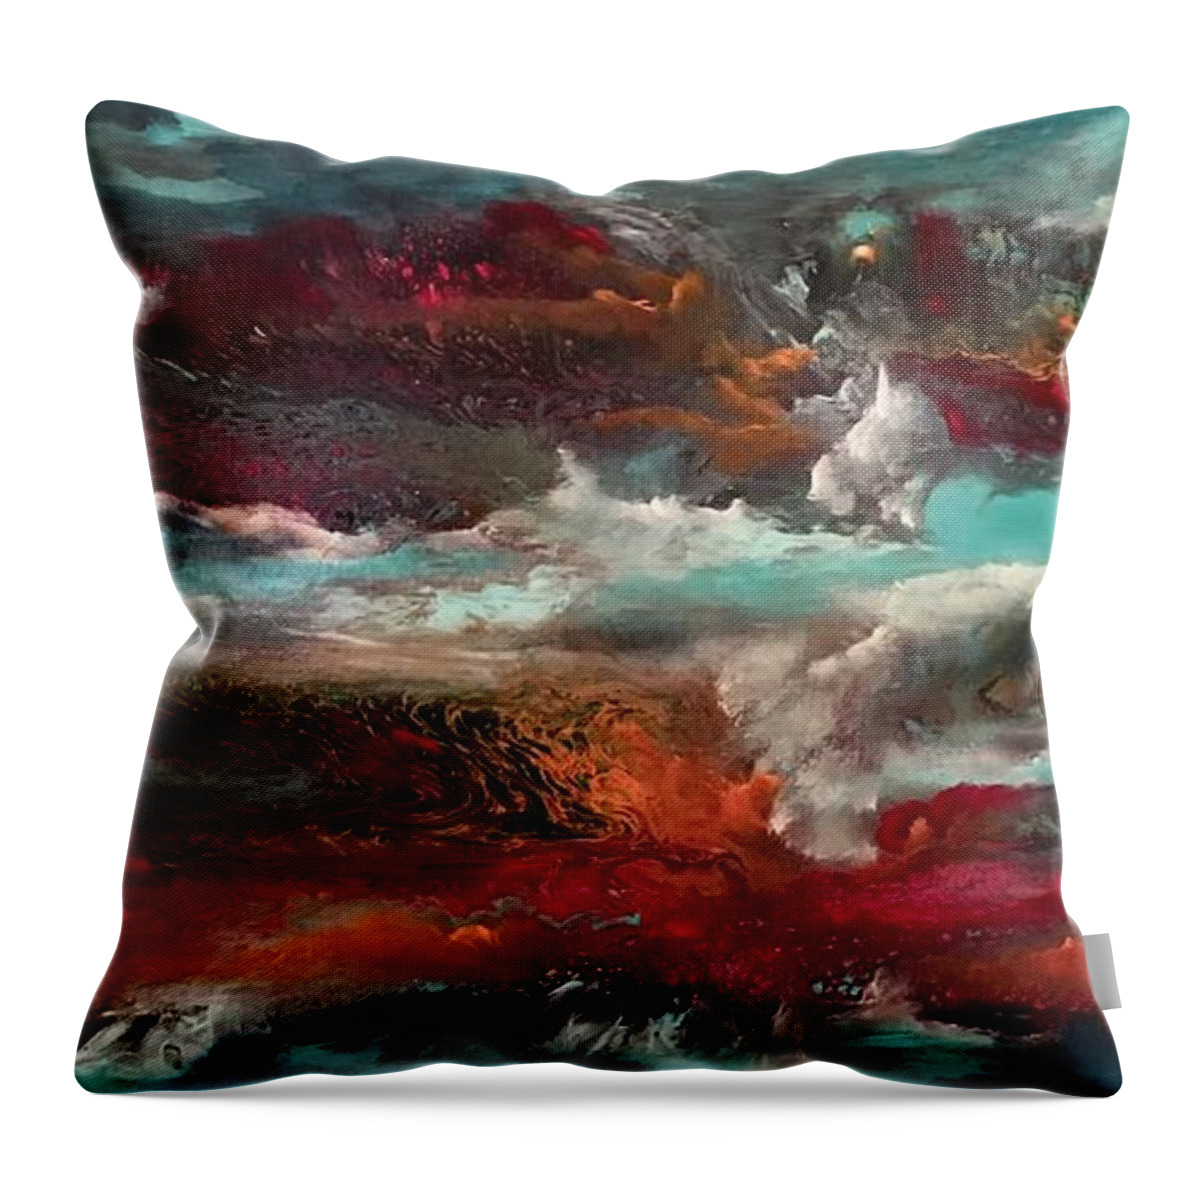 Abstract Throw Pillow featuring the painting Gloaming by Soraya Silvestri